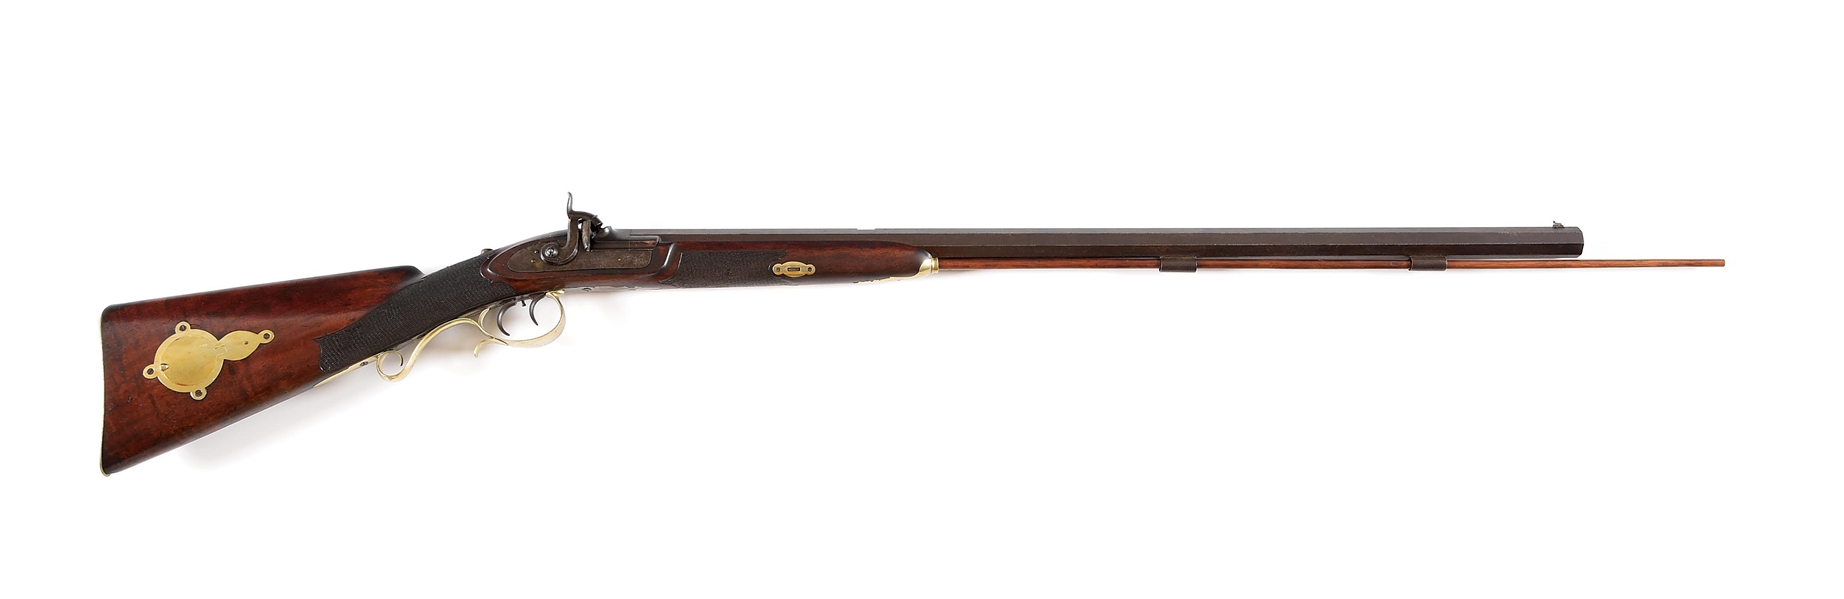 (A) HALF STOCK PERCUSSION RIFLE SIGNED "J. C. J. MEYERS BALTIMORE M. D."